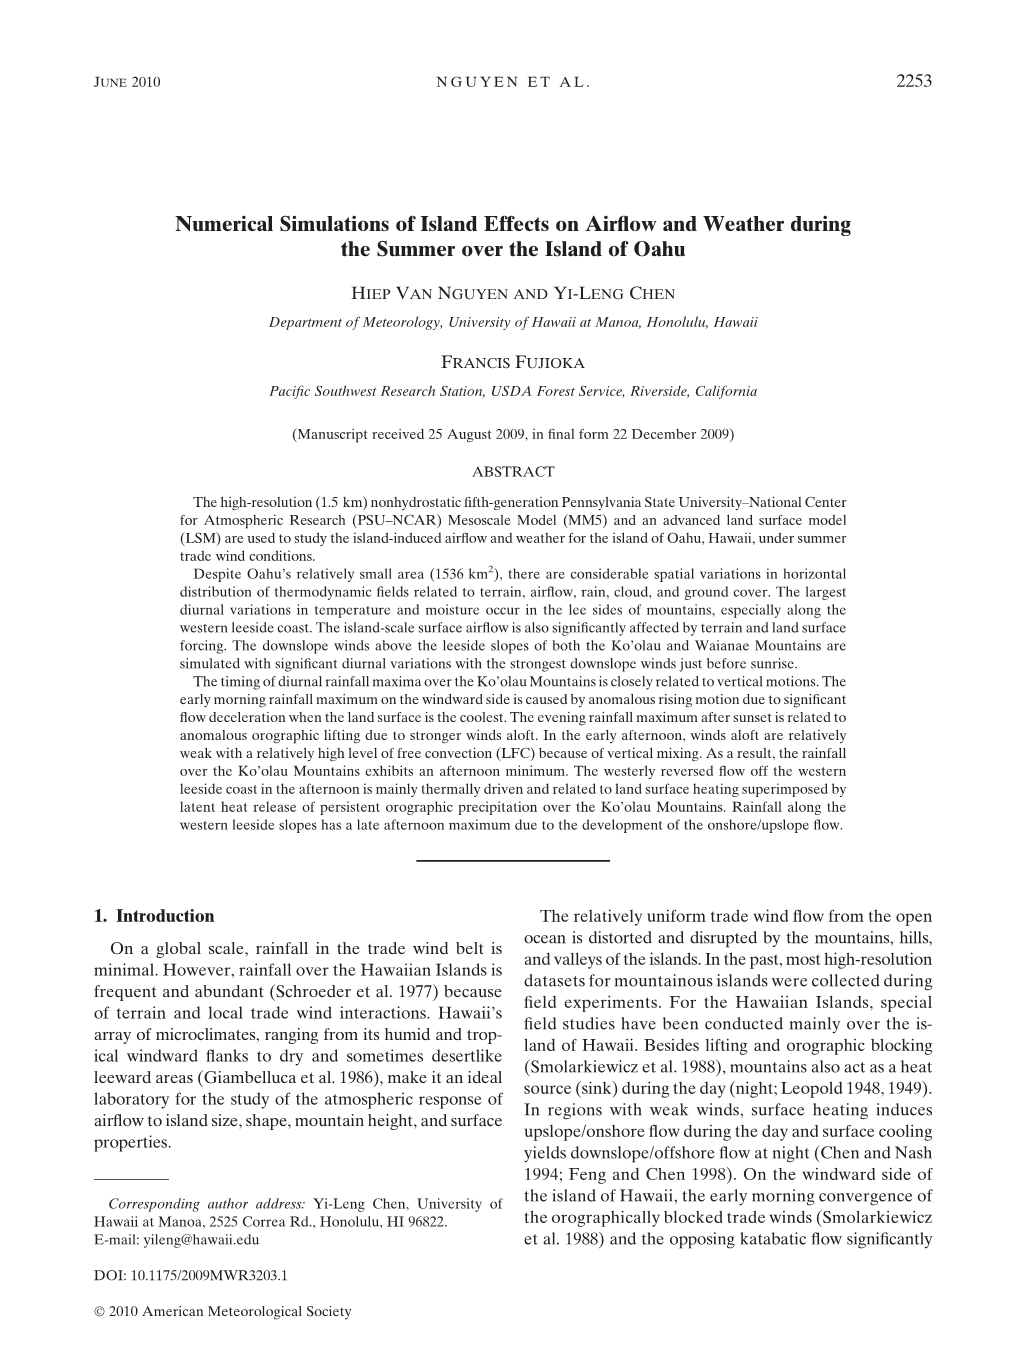 Numerical Simulations of Island Effects on Airflow and Weather